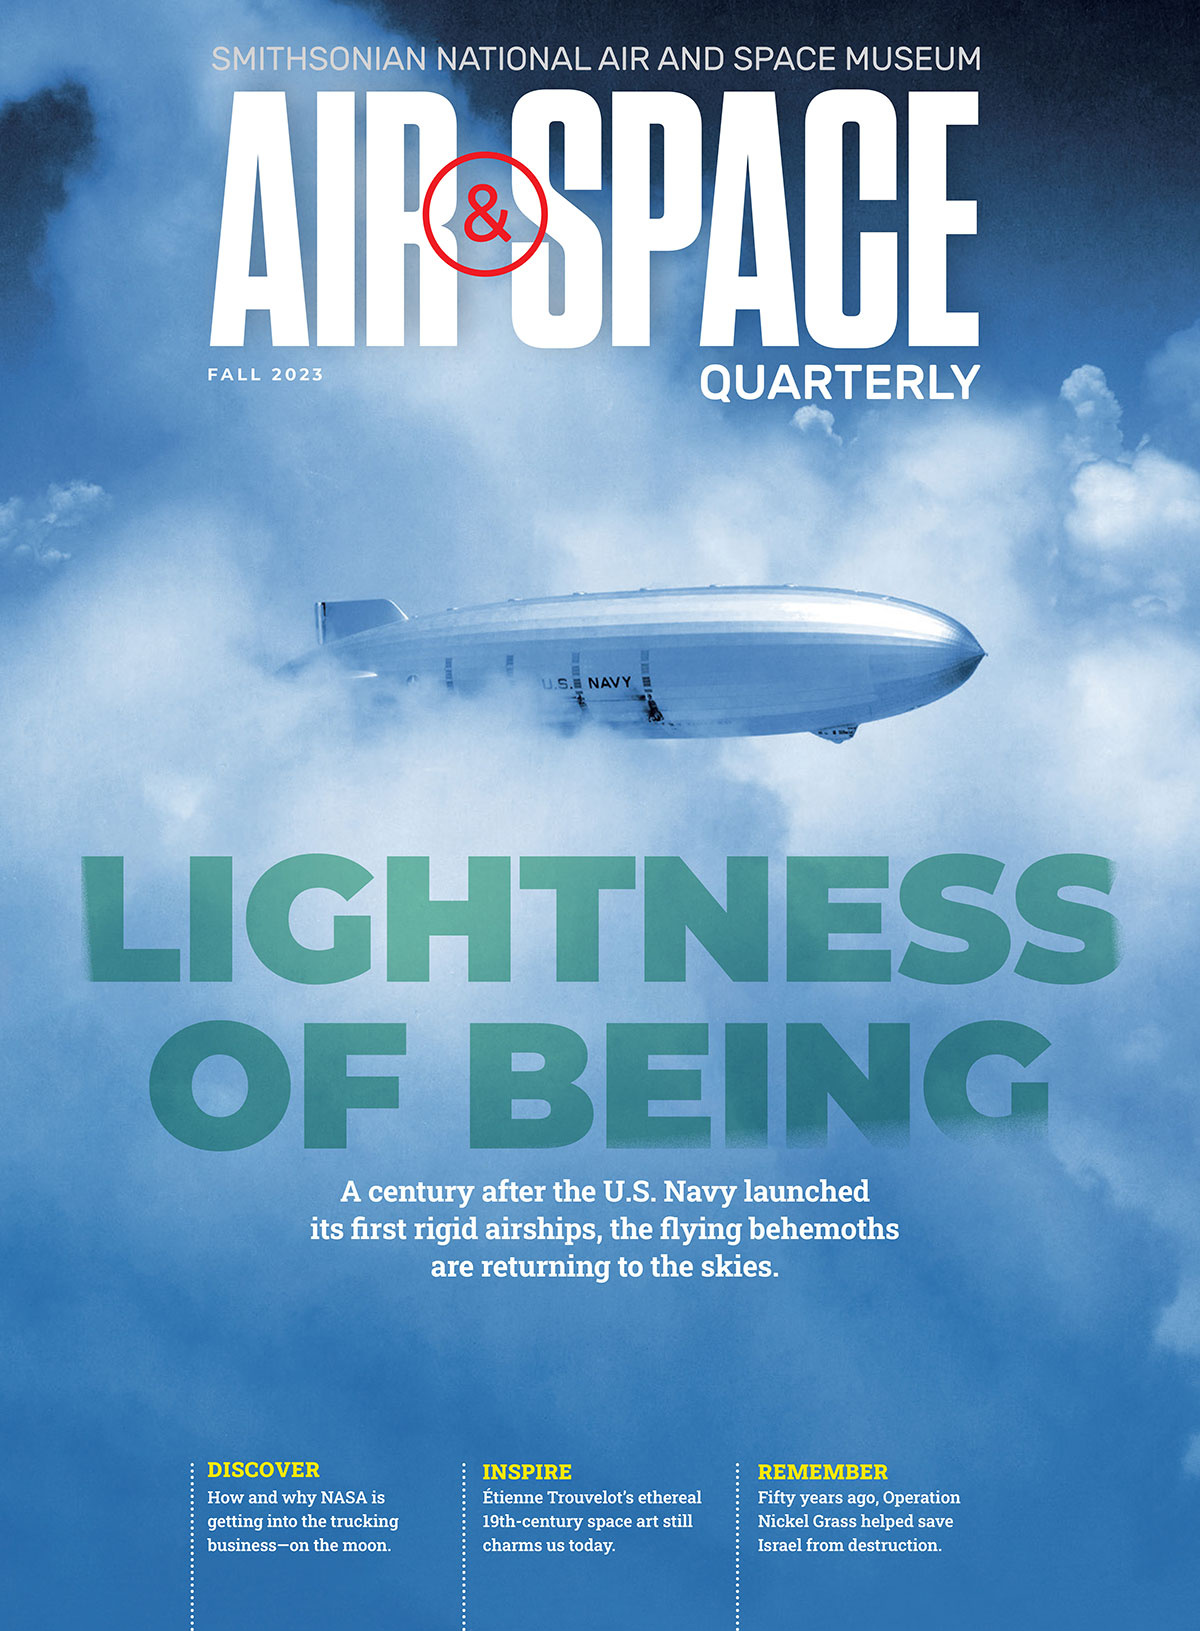 An airship flying through the clouds placed under "Air & Space Quarterly" and above "Lightness of Being" text.